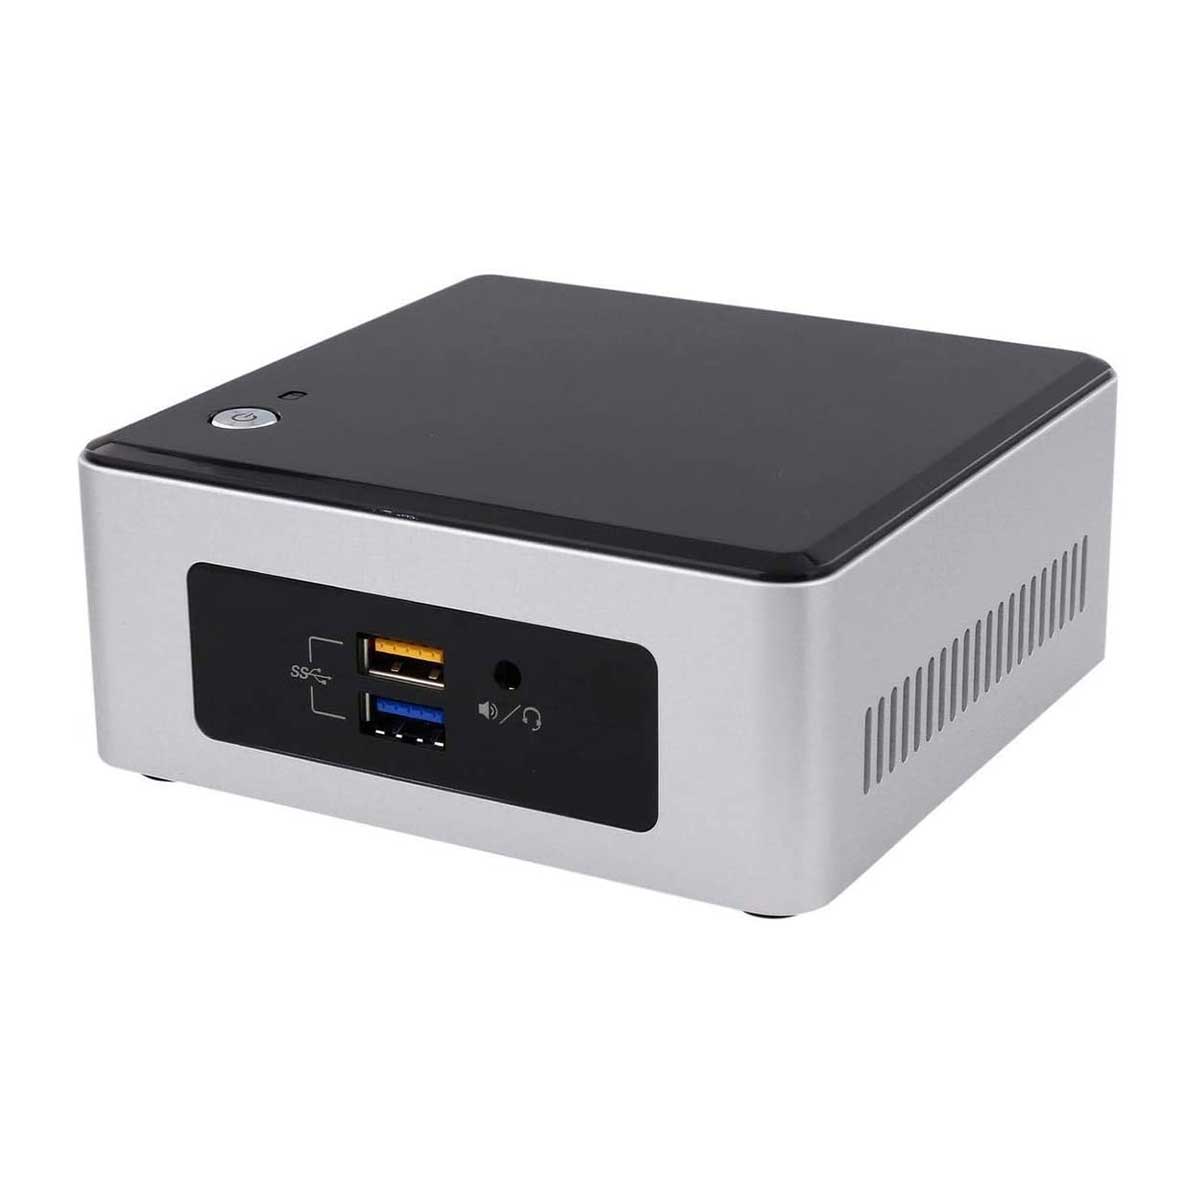 Featured image for “インテル NUC5CPYH ミニ PC  Celeron® プロセッサー N3050”